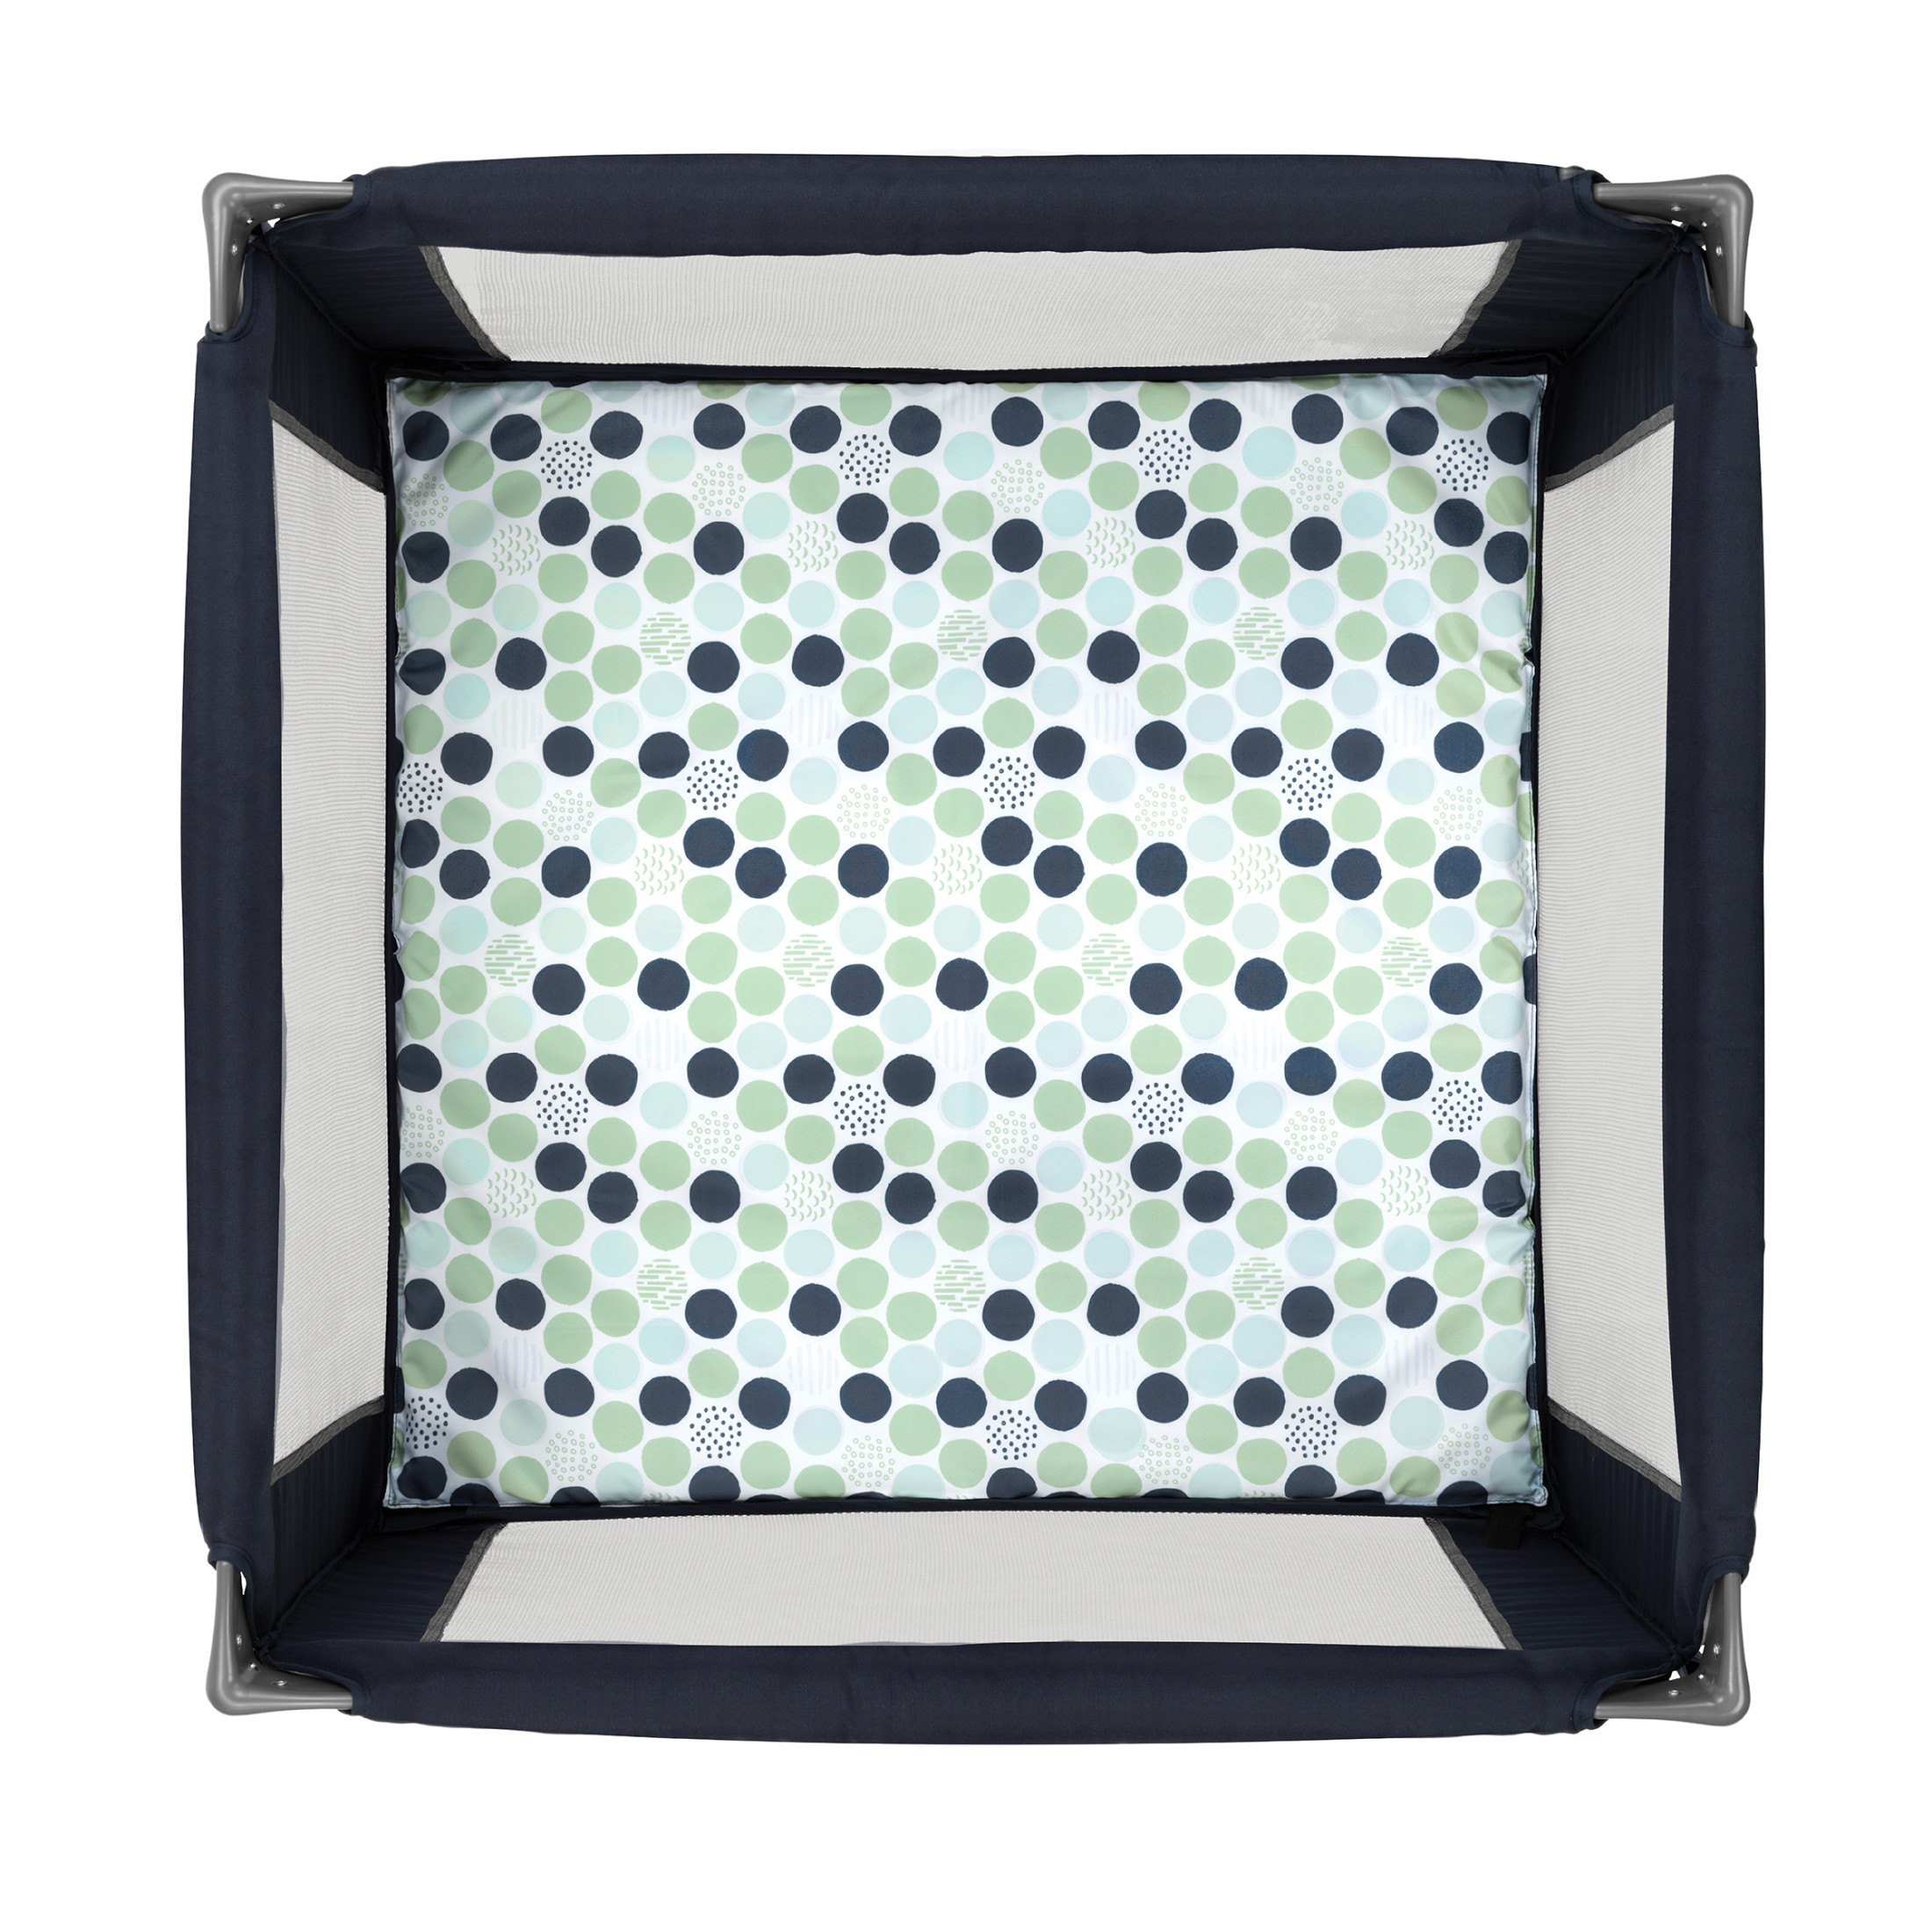 Chicco Tot Quad Portable Square Baby Playpen - Confetti (Blue) - image 3 of 7